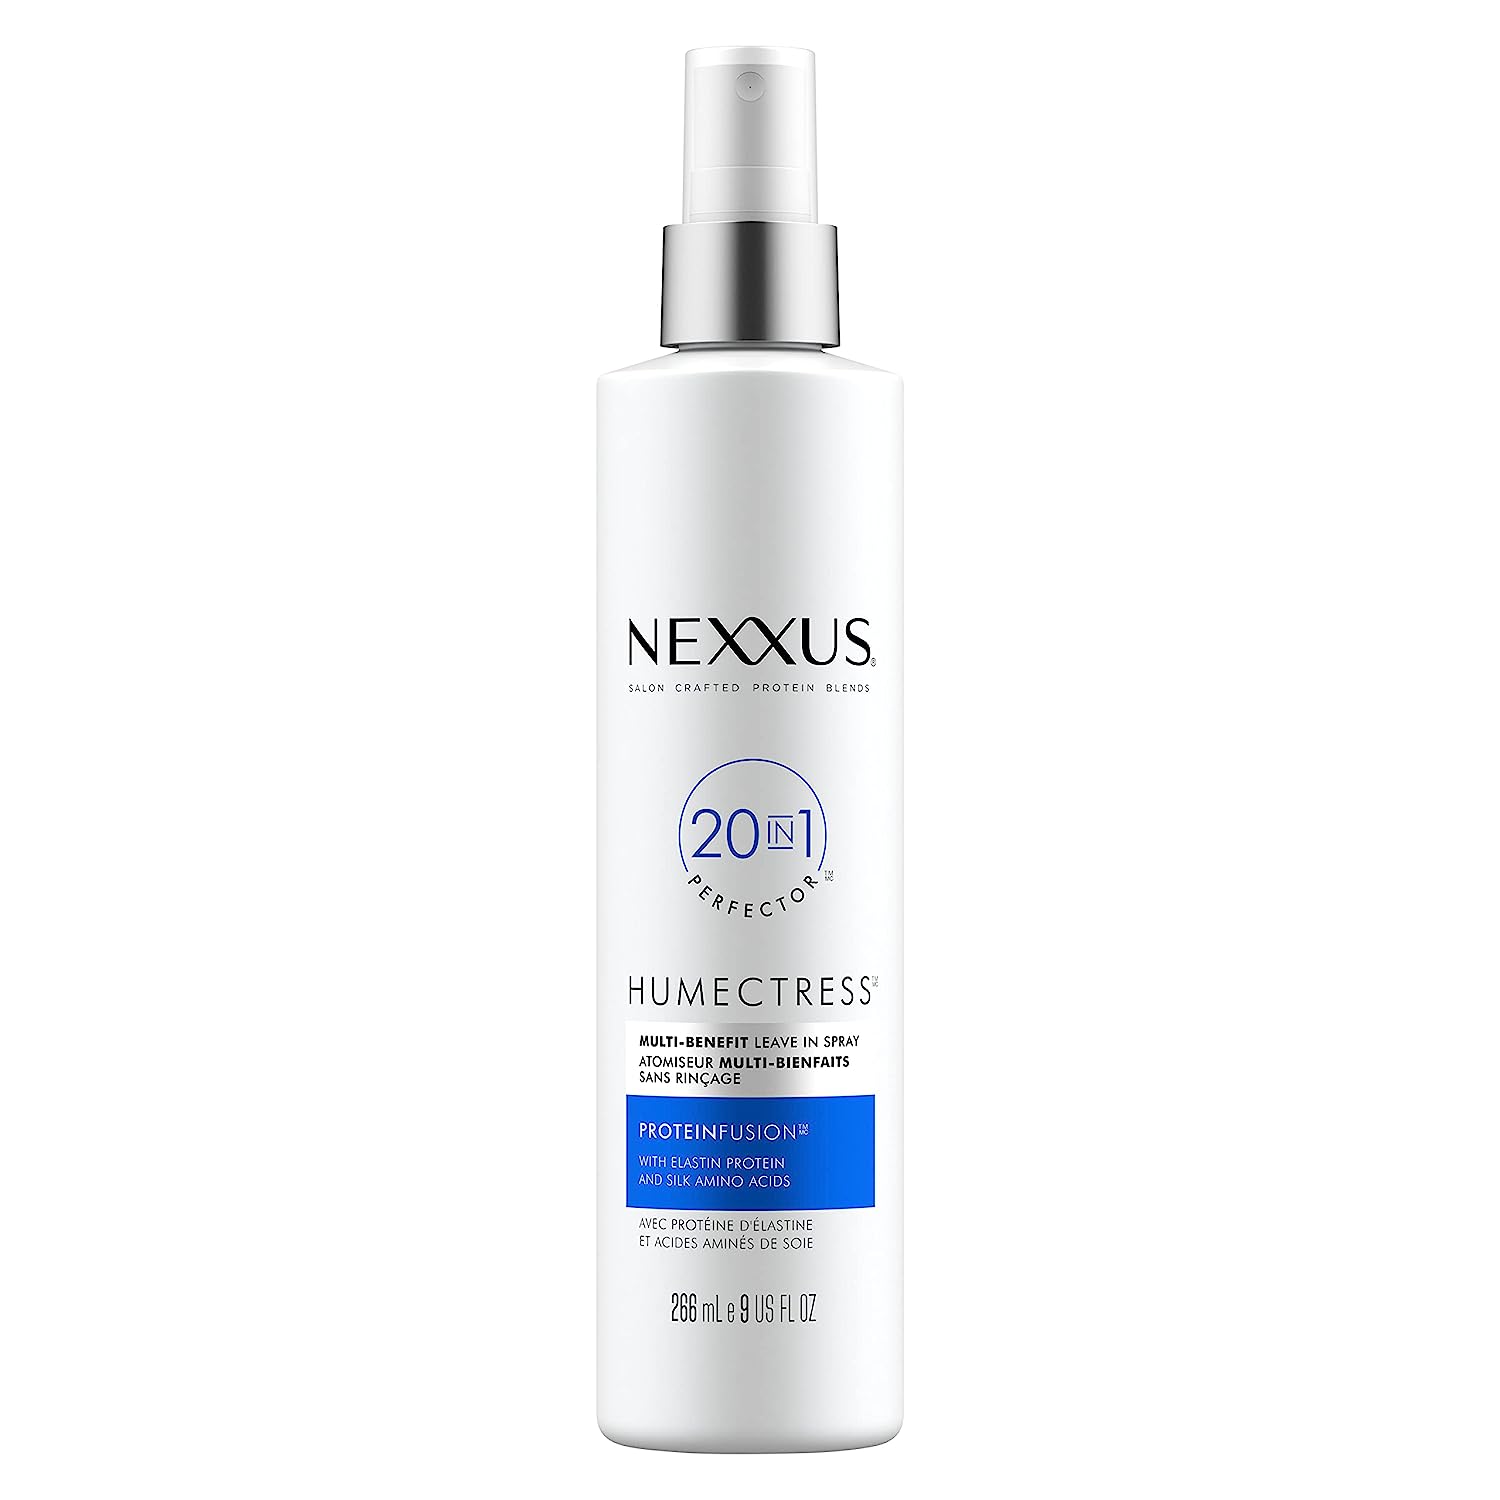 Nexxus Humectress Leave-In Conditioner Spray 20-in-1 [...]